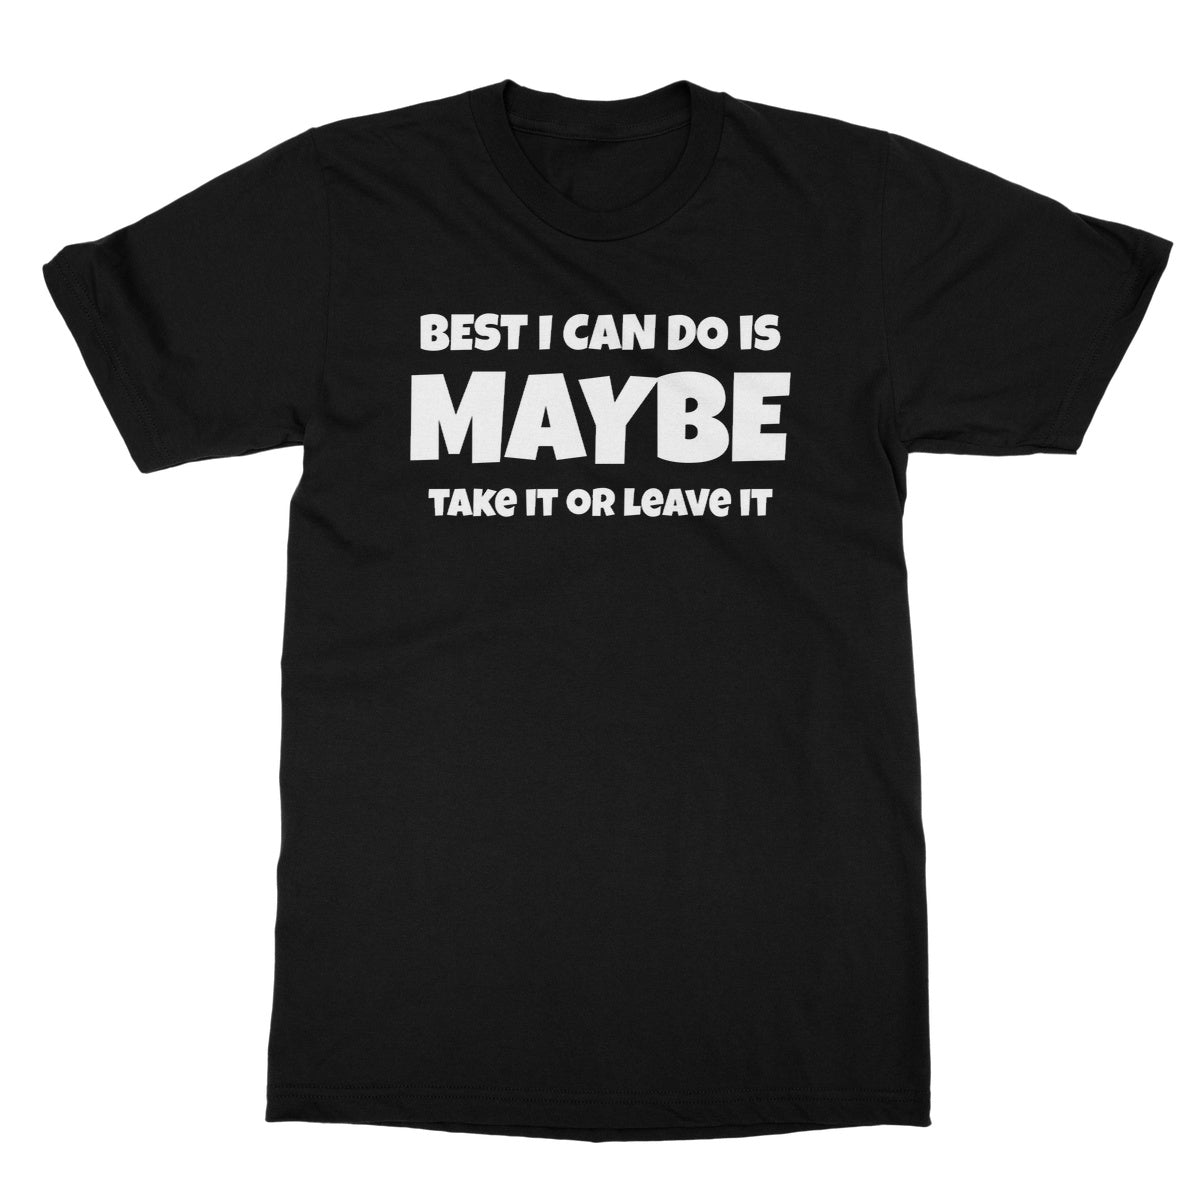 best I can do is maybe t shirt black